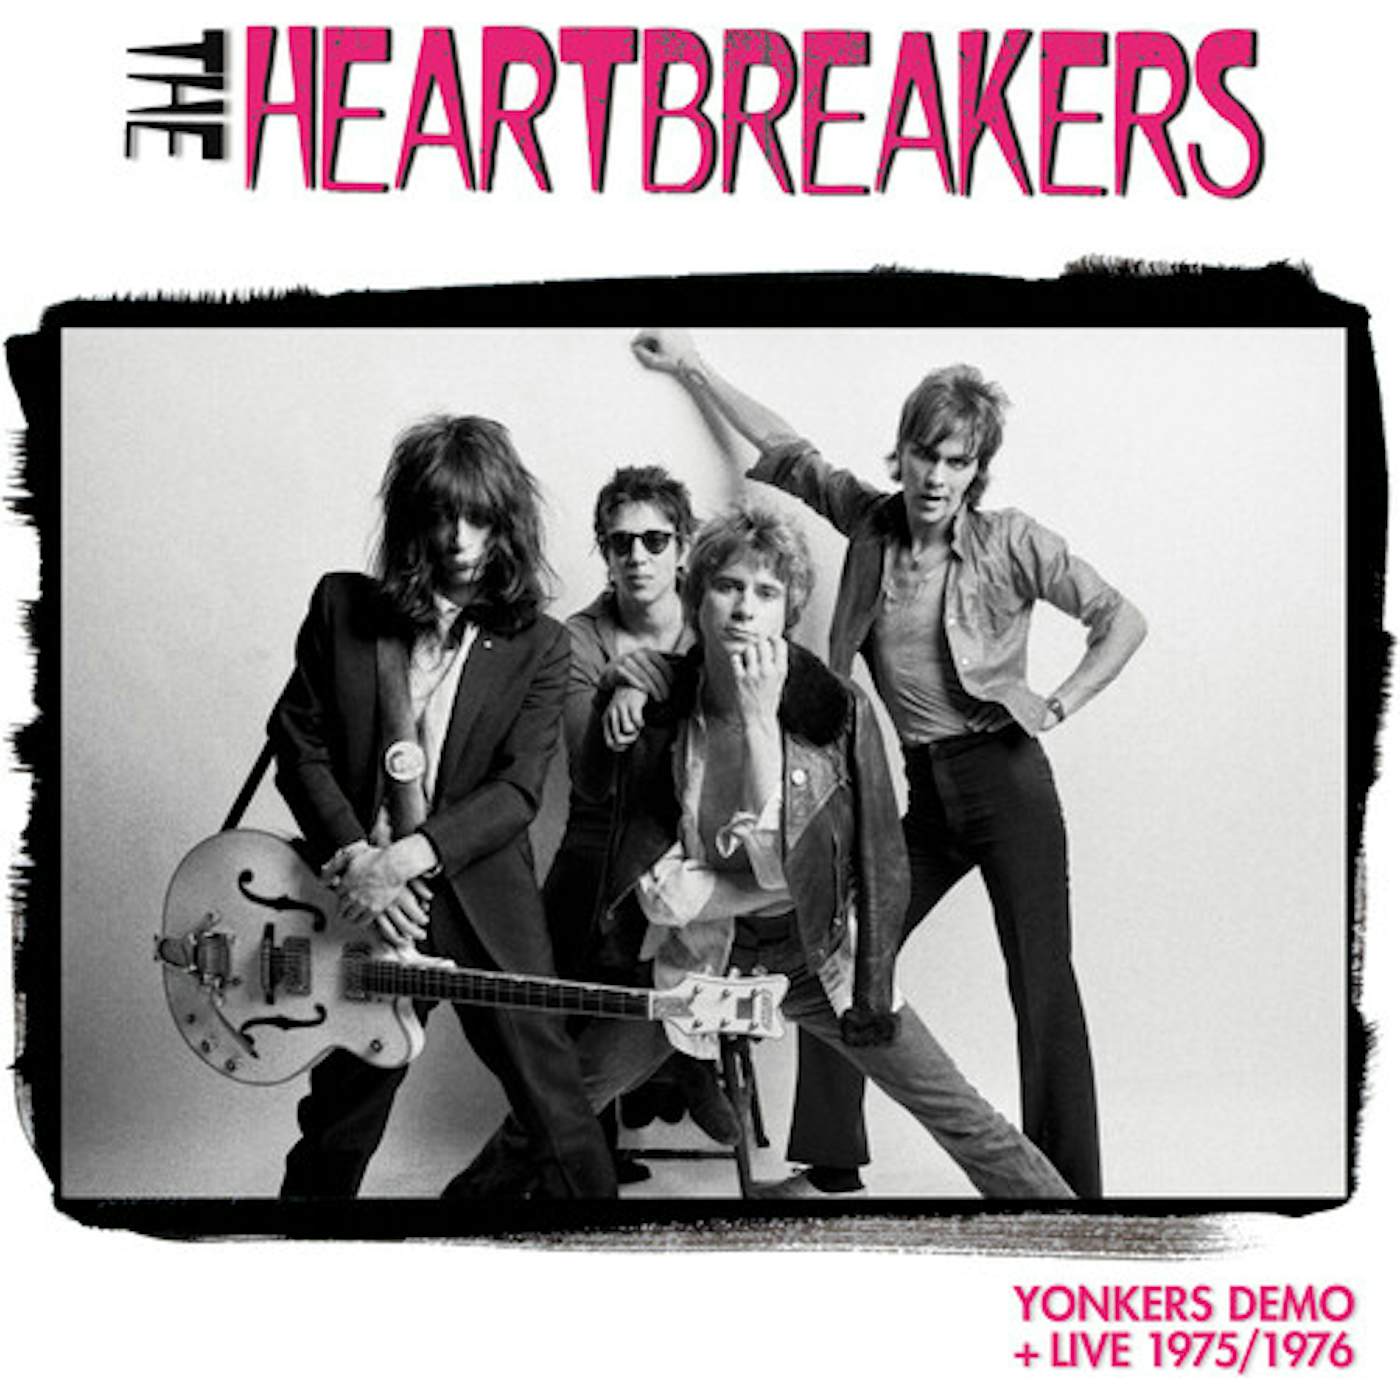 Johnny Thunders & The Heartbreakers YONKERS DEMO + LIVE 1975/1976 CD